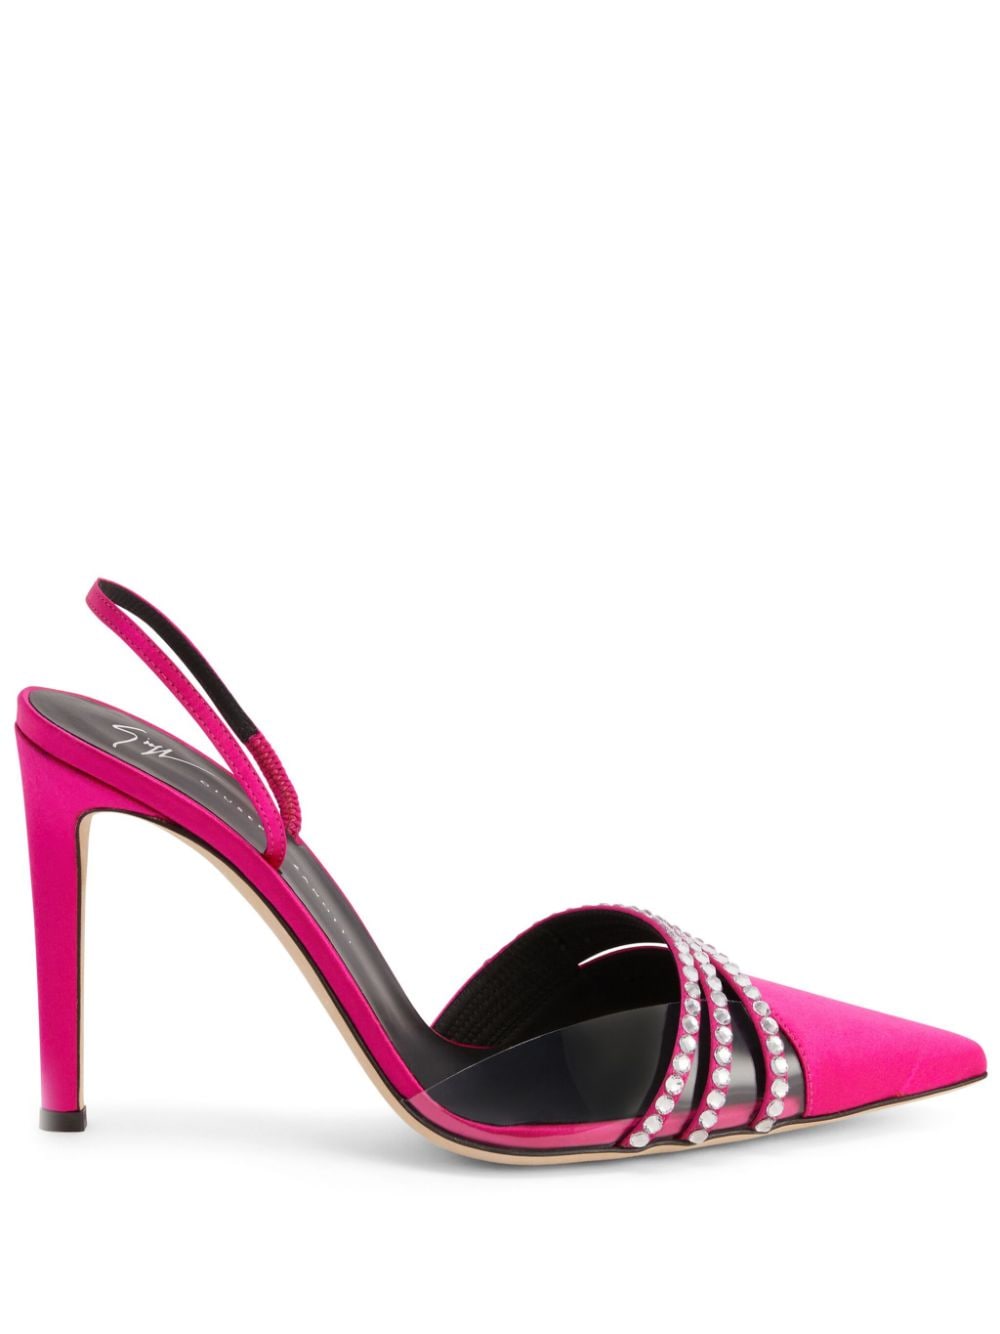 Giuseppe Zanotti Audrine 105mm Leather Pumps In Pink